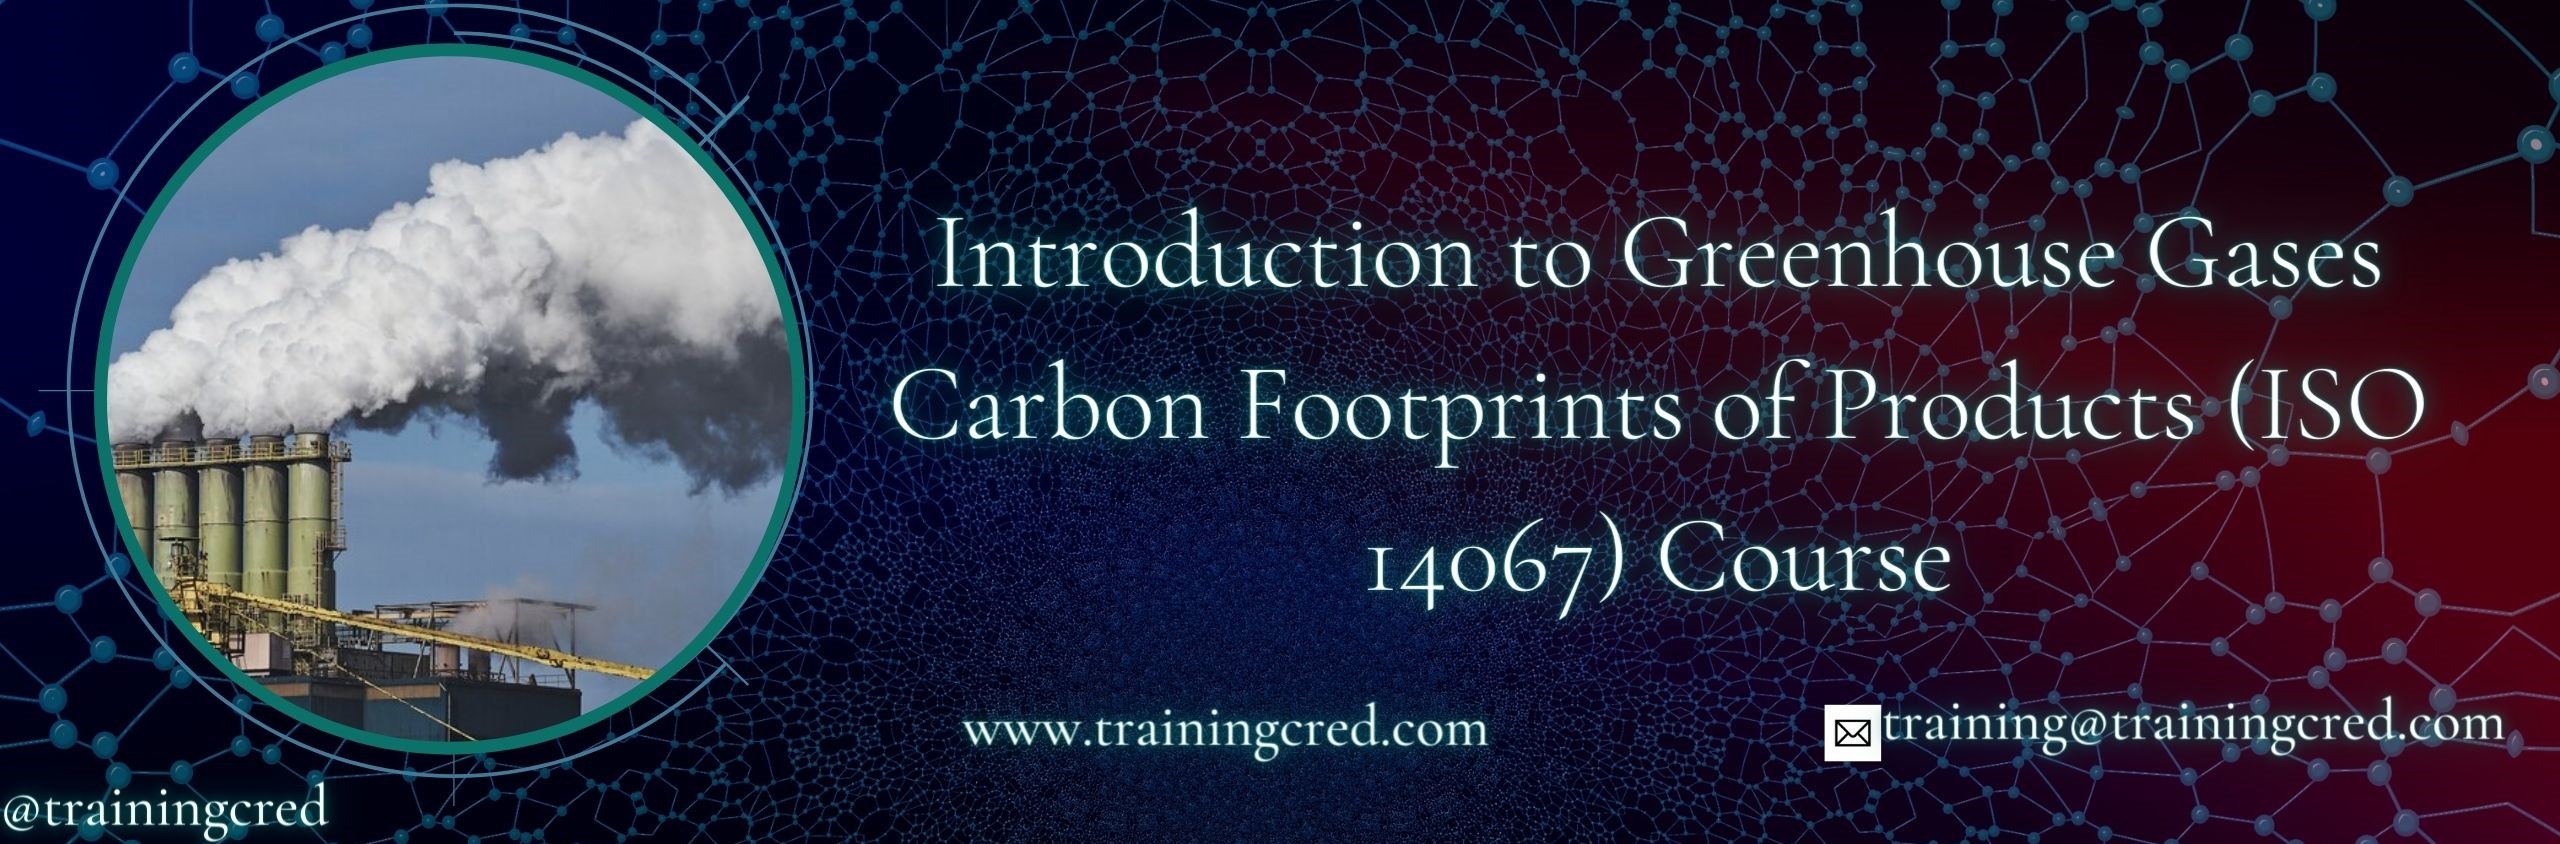 Introduction to Greenhouse Gases Carbon Footprints of Products (ISO 14067) Training